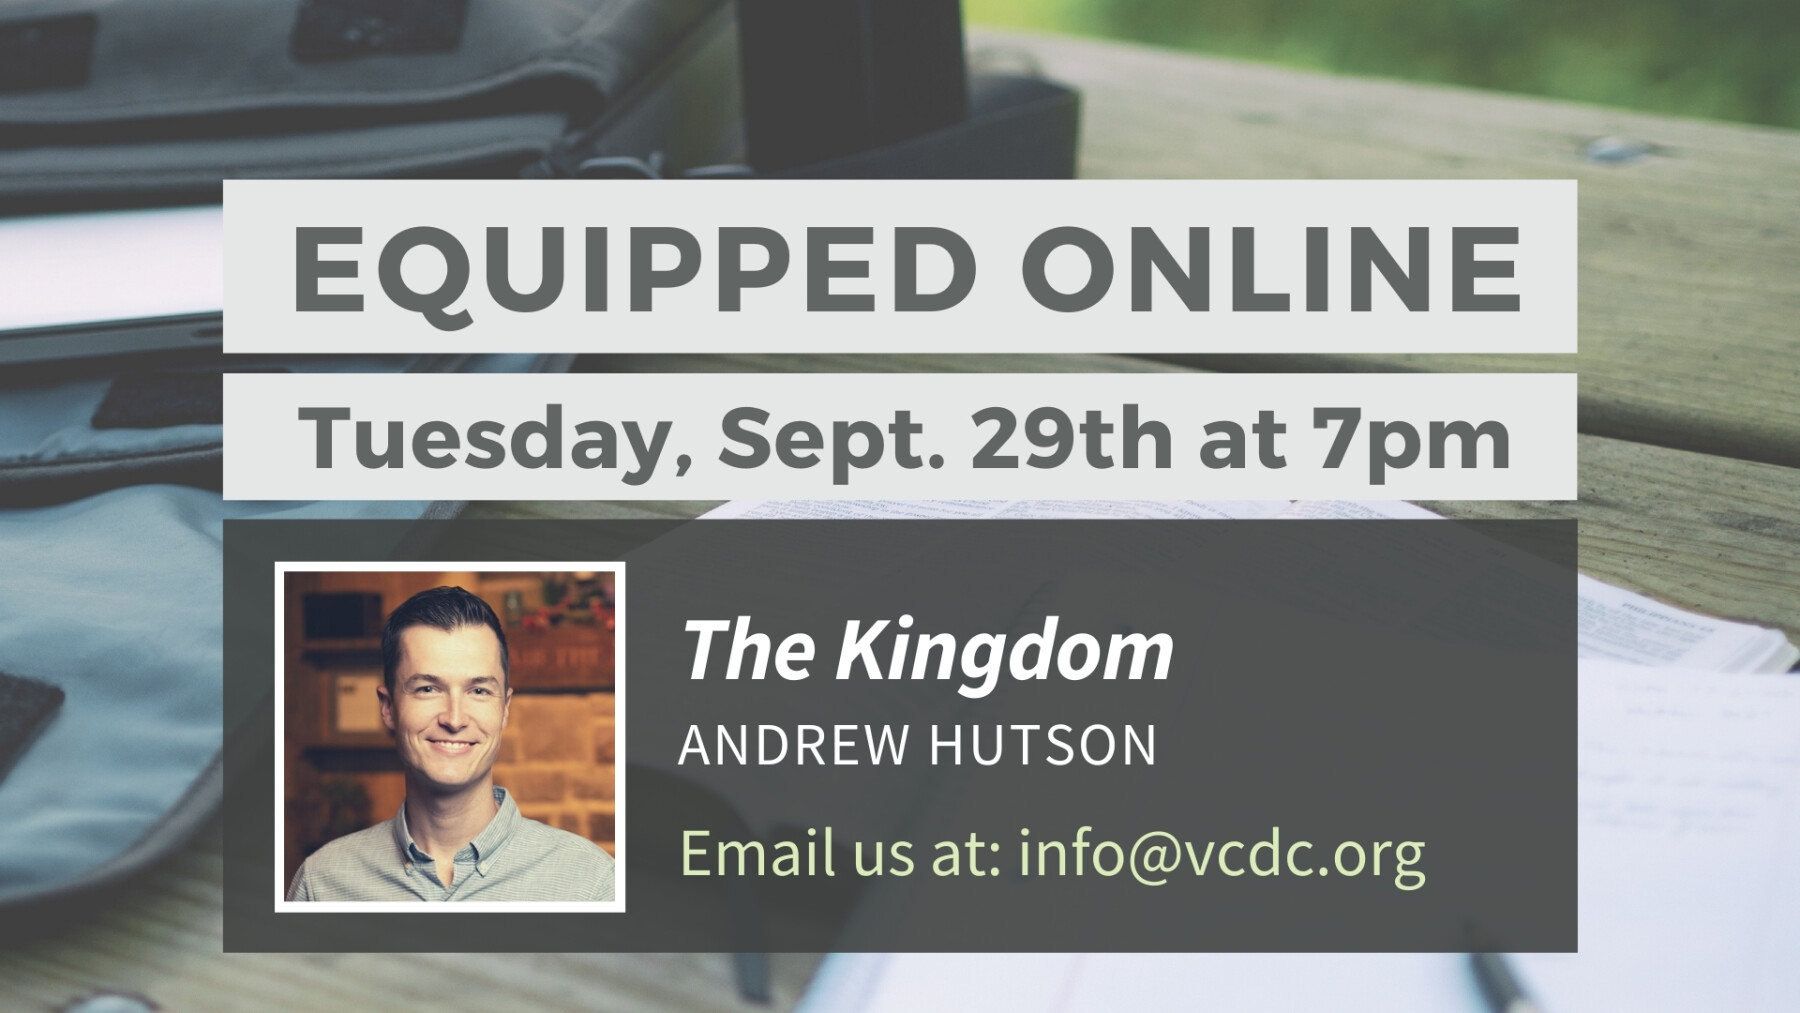 Equipped Online: The Kingdom